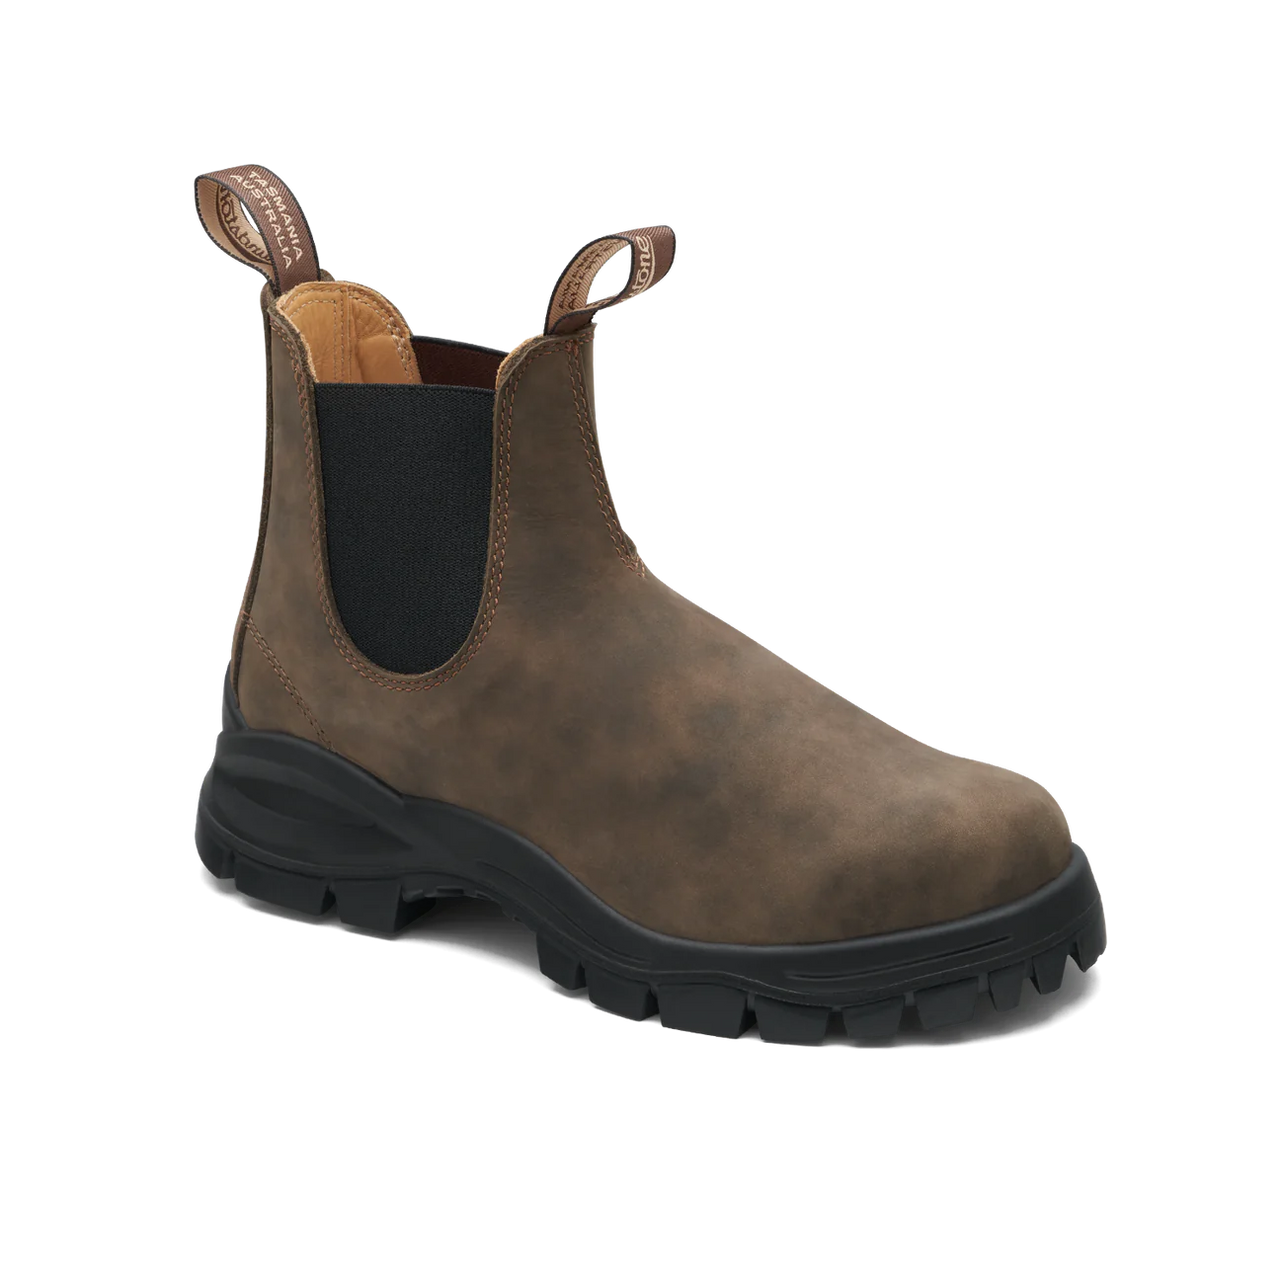 Blundstone Unisex #2239 Lug Sole Boots - Rustic Brown